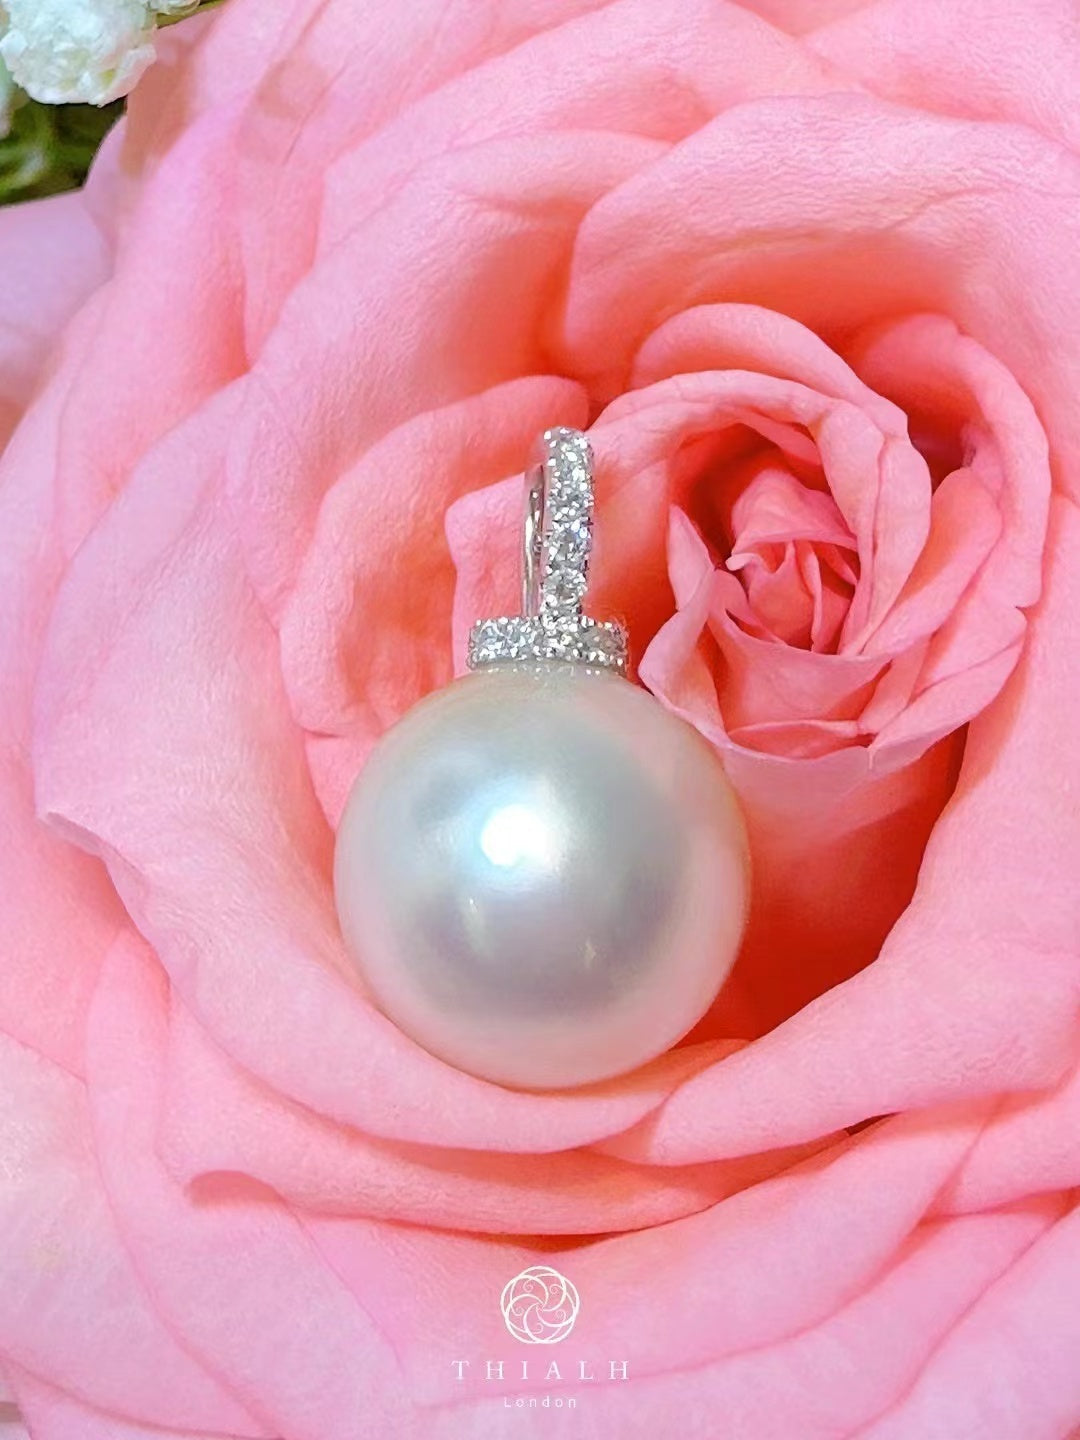 Load image into Gallery viewer, South Sea Pearl Pendant Diamond Necklace (Accept Pre-order)
